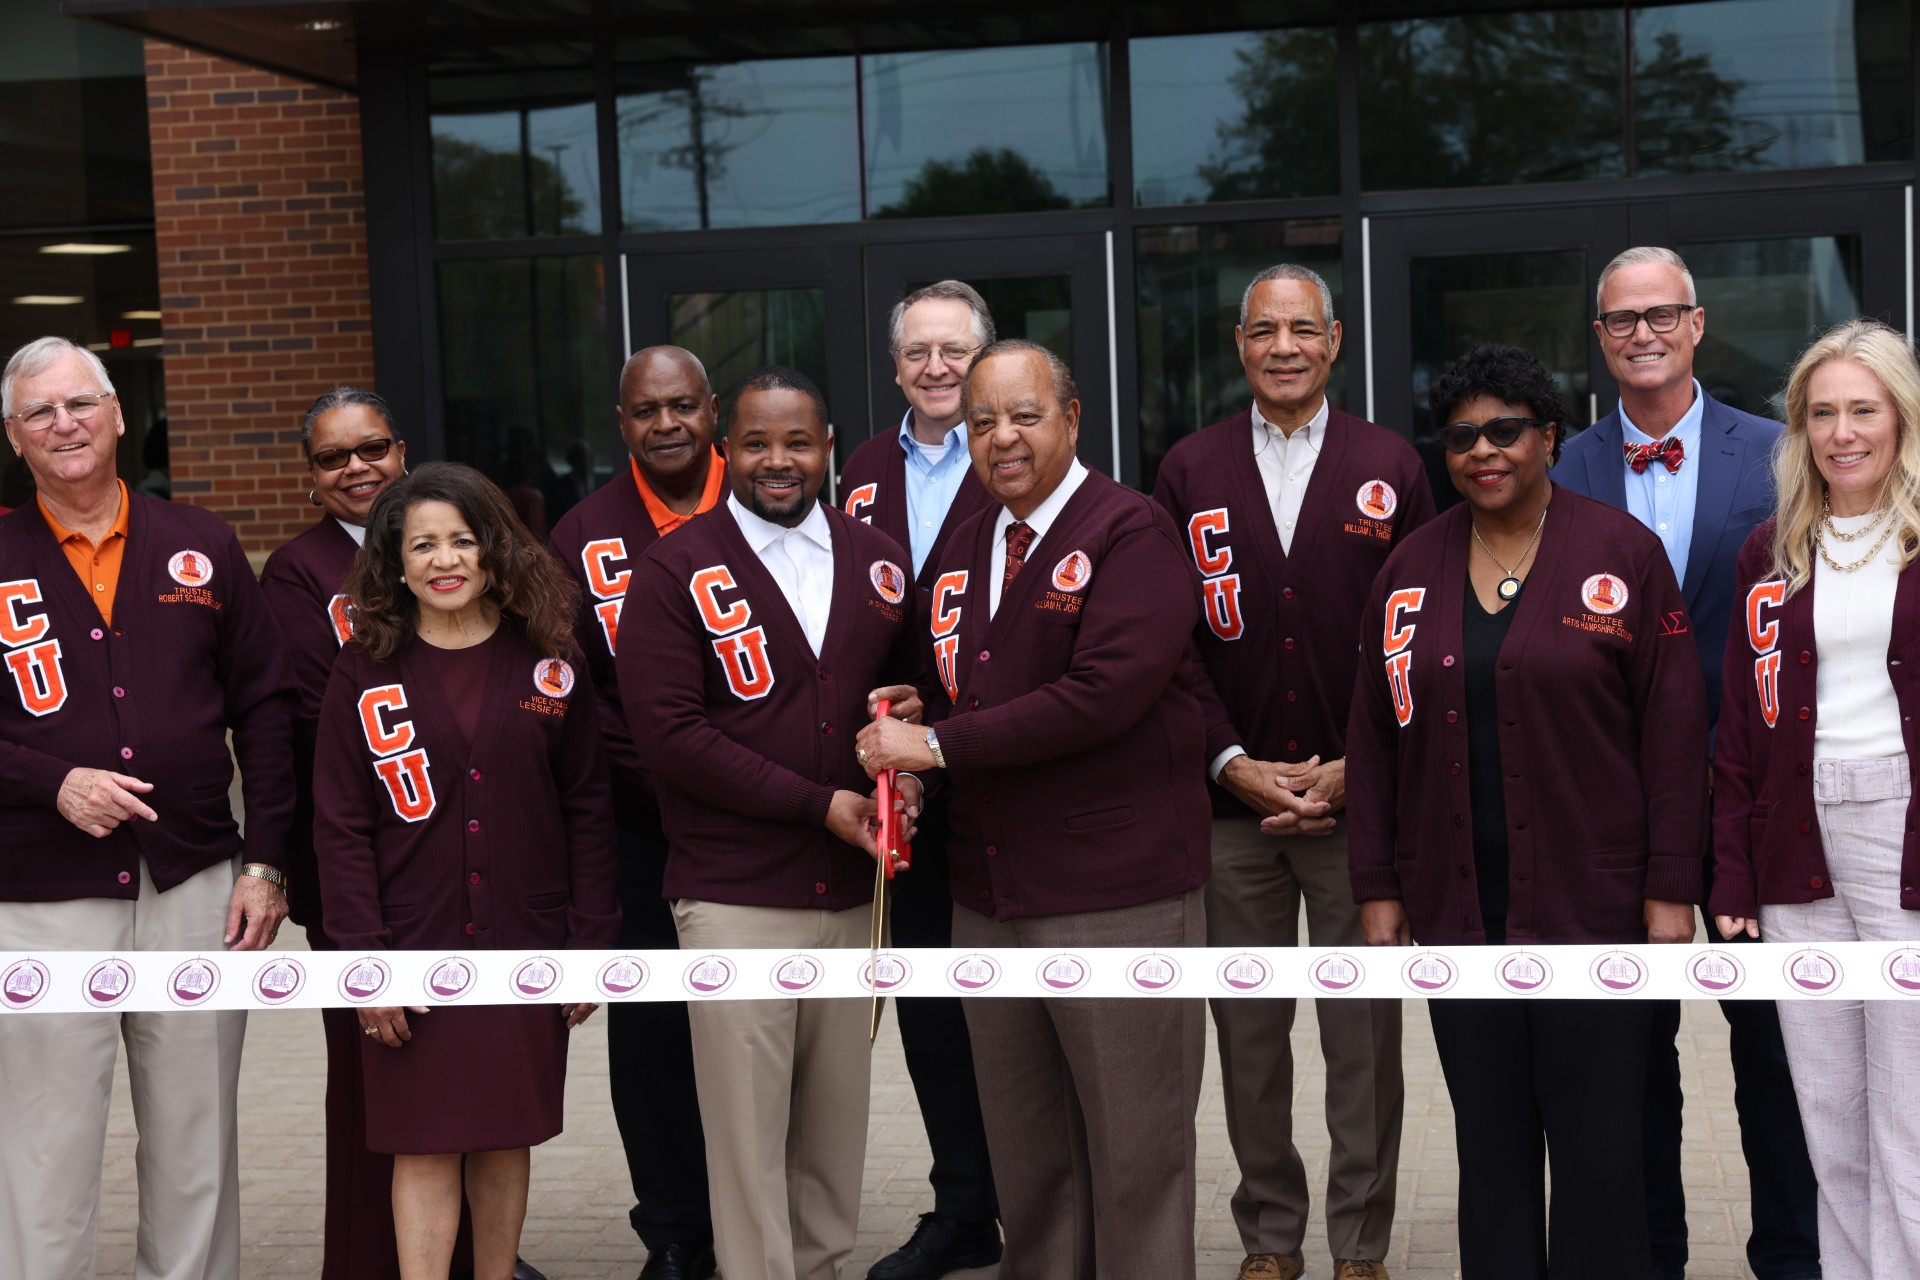 Ribbon Cutting-Dr. Warmack, Trustee Johnson and  Board members during New Student Center Ribbon Cutting